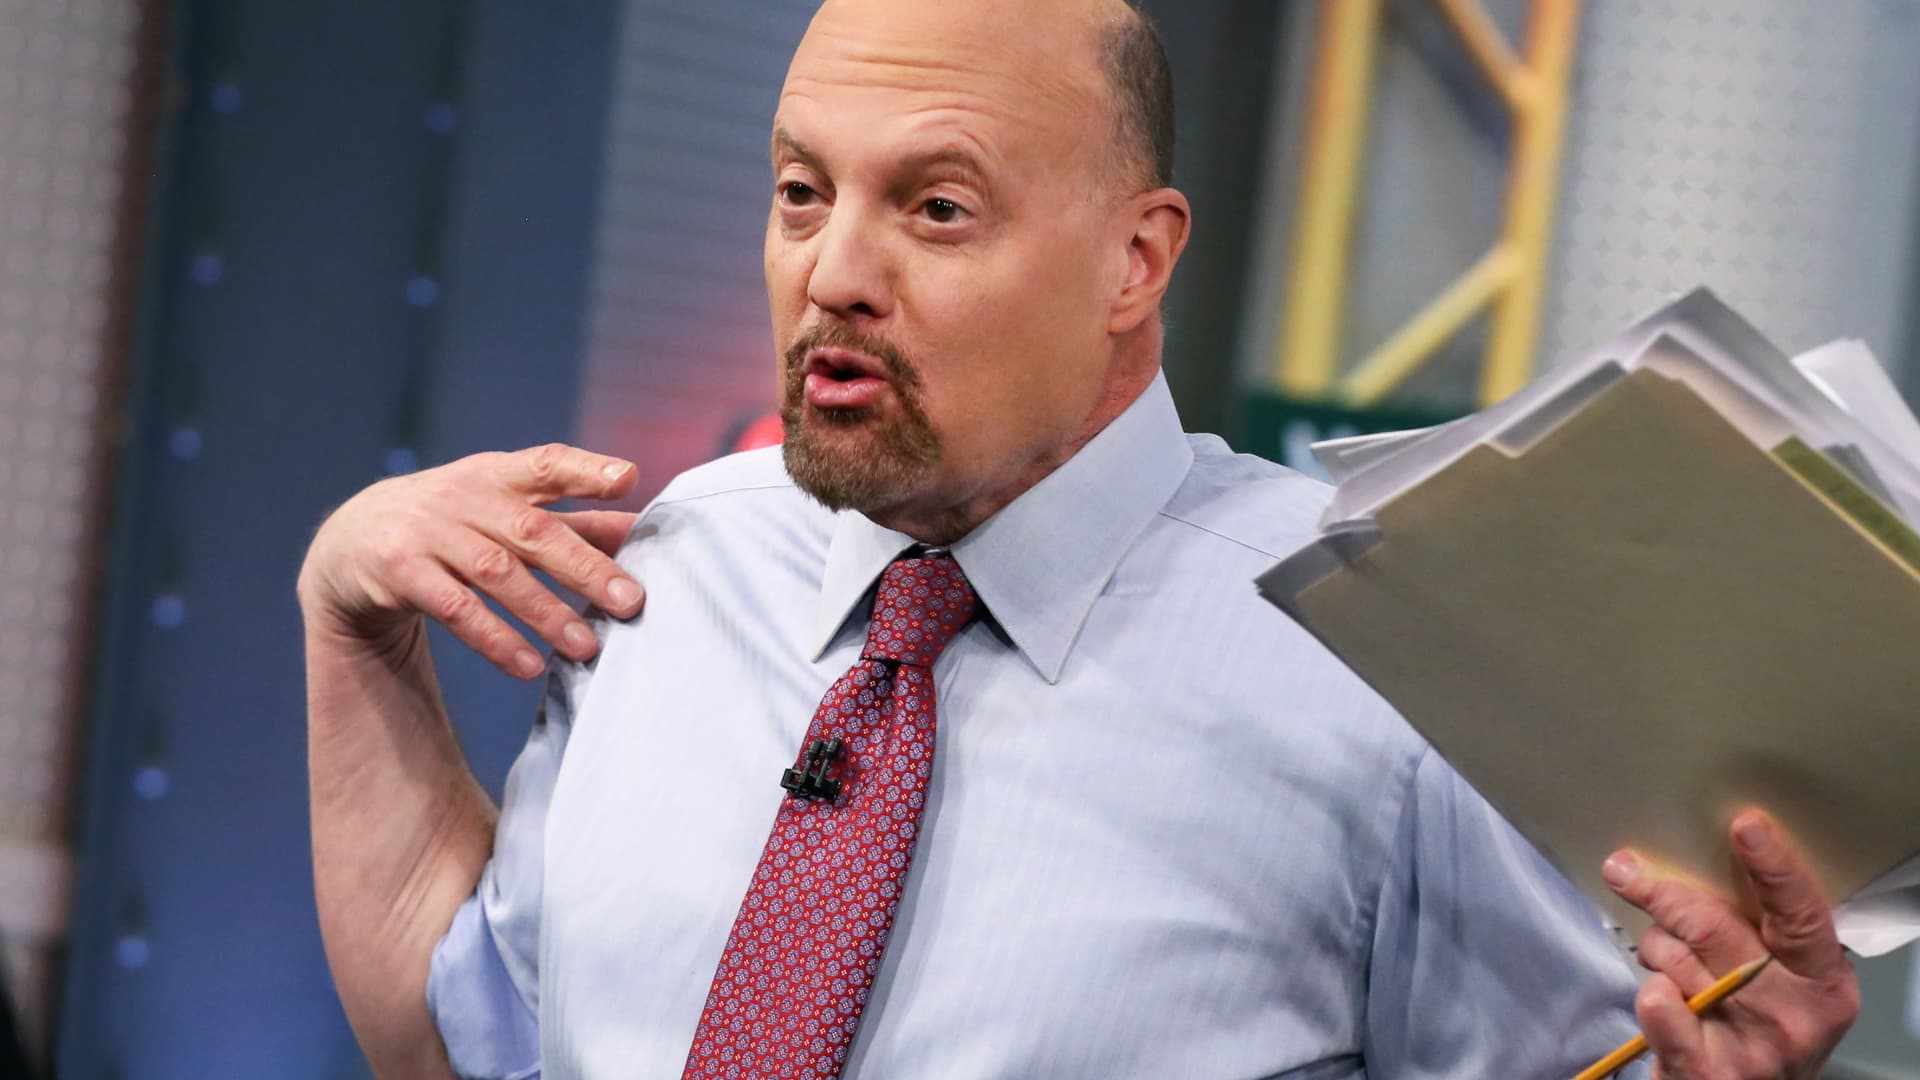 Jim Cramer says this ‘trifecta’ needs to see dampening inflation for the Fed to stop raising rates